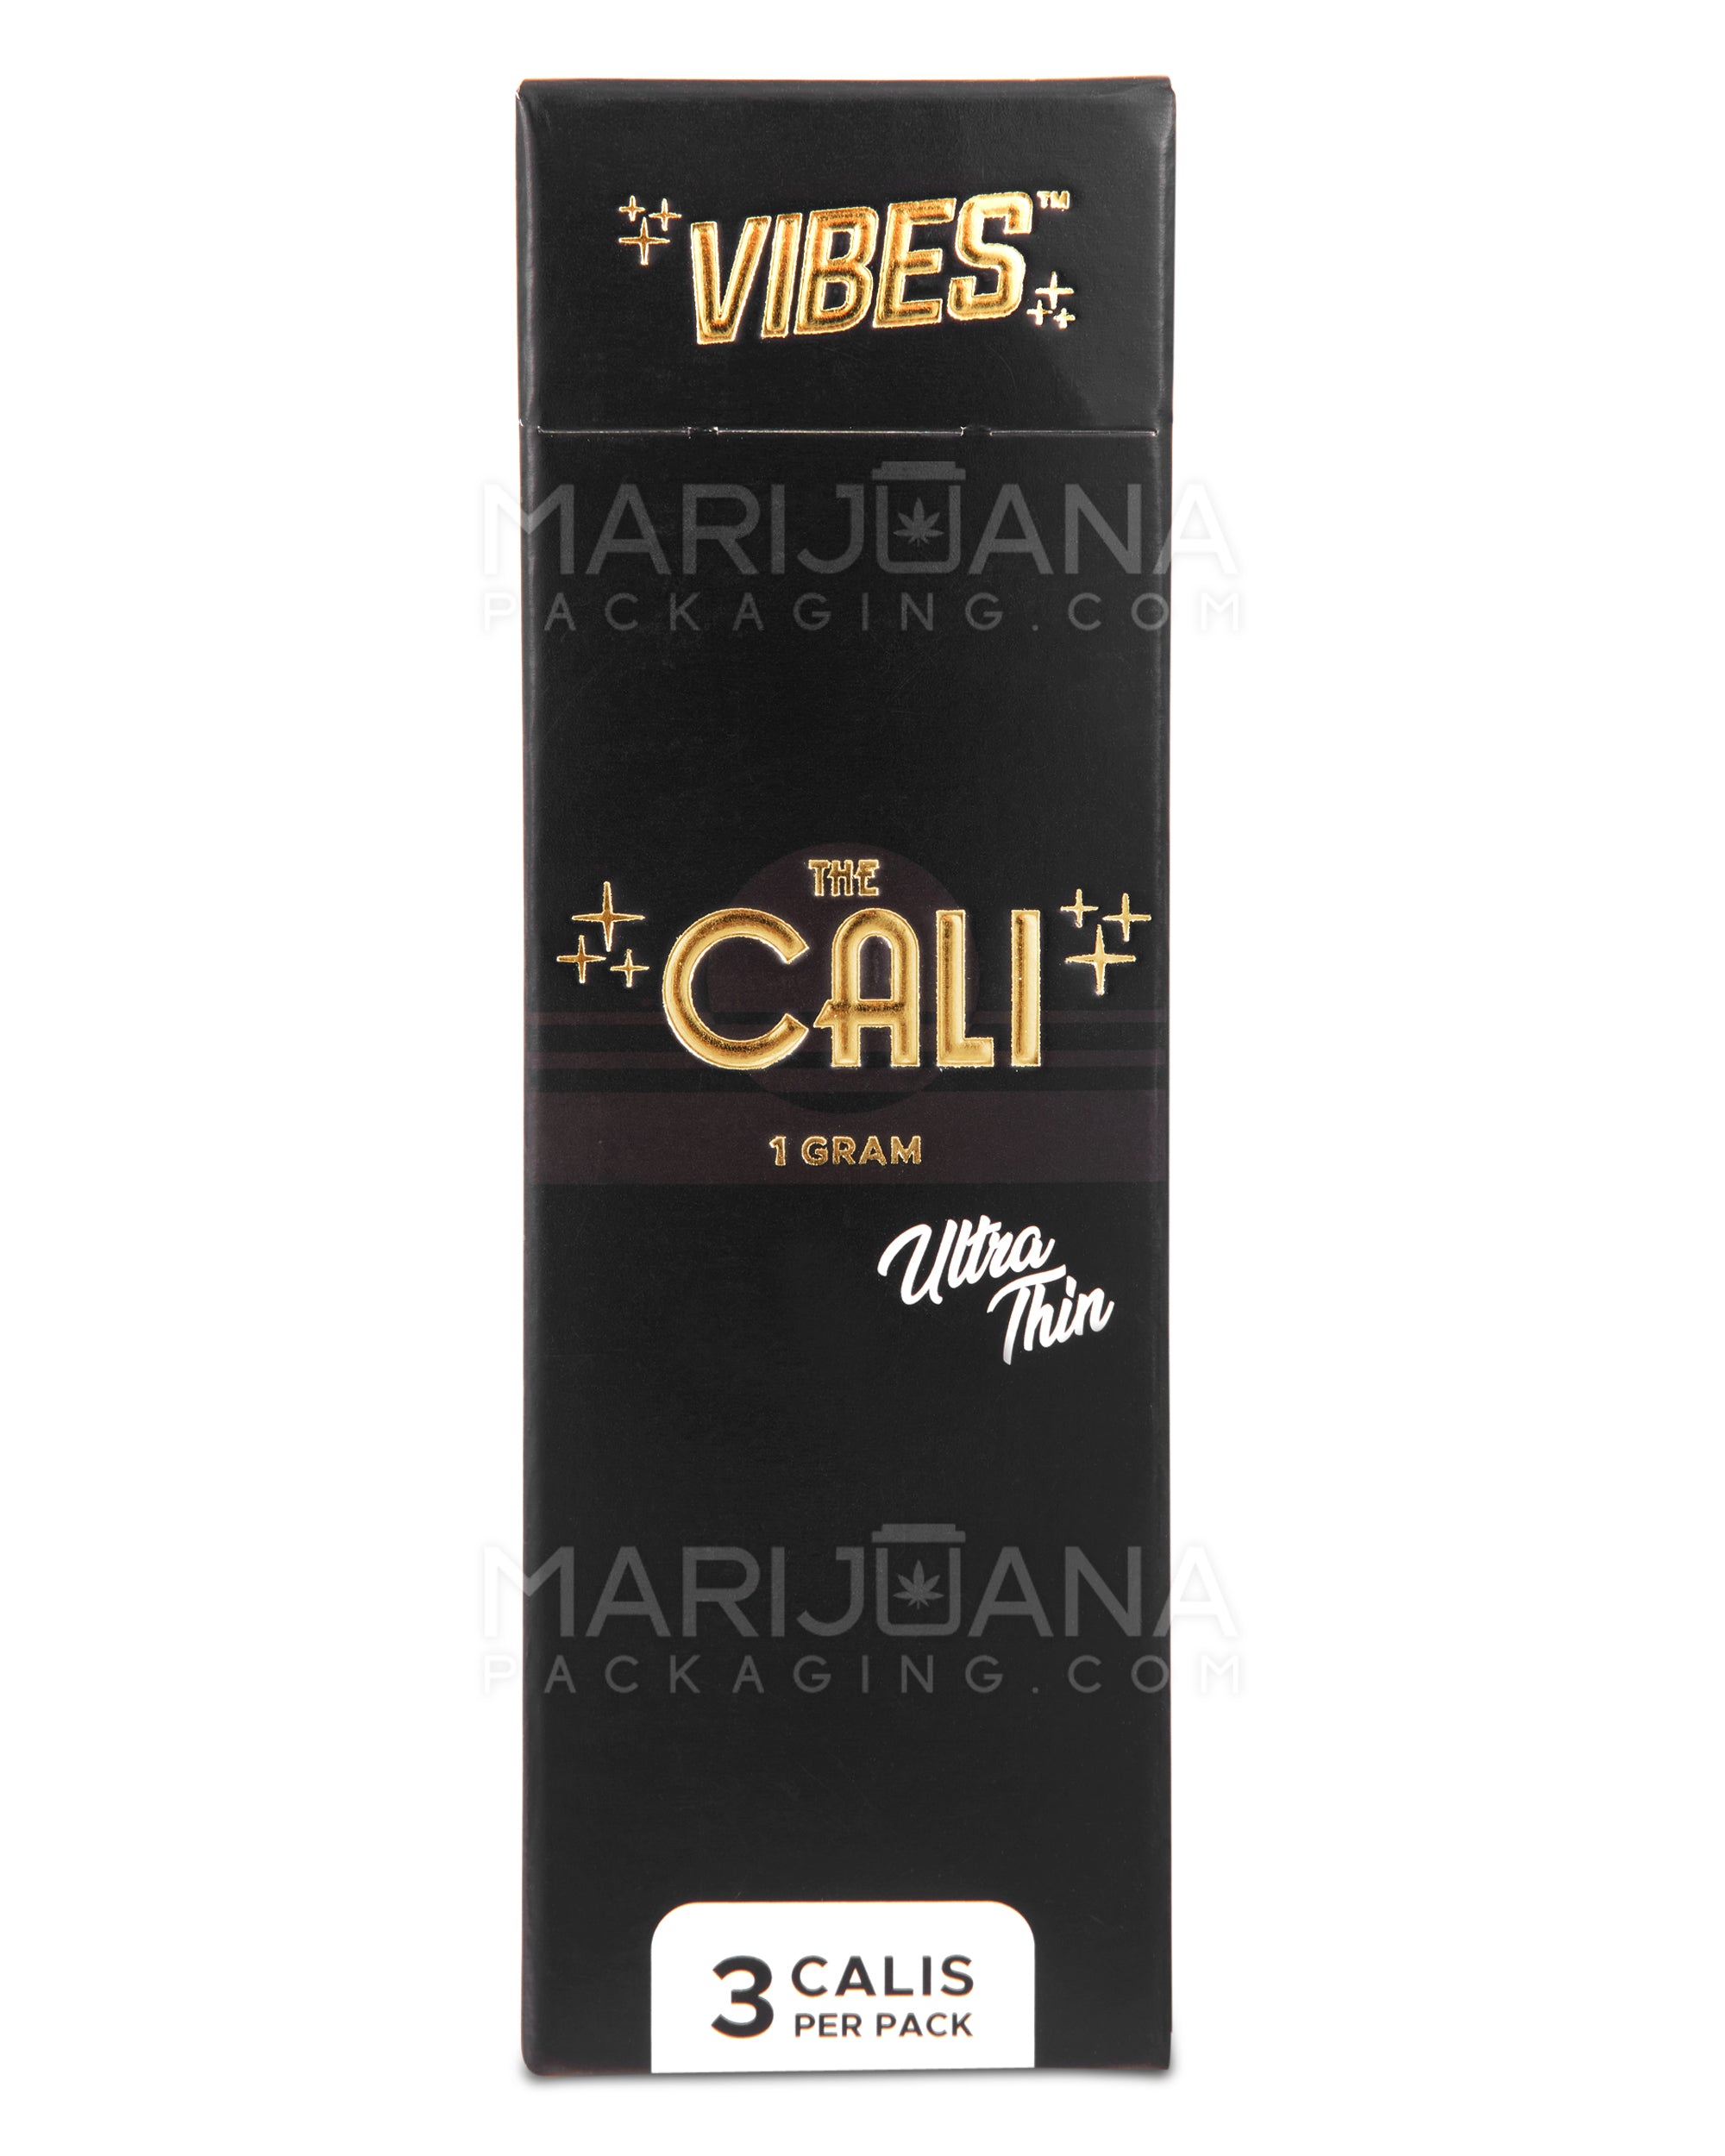 VIBES | 'Retail Display' The Cali 1 Gram Pre-Rolled Cones | 110mm - Ultra Thin Paper - 24 Count - 3